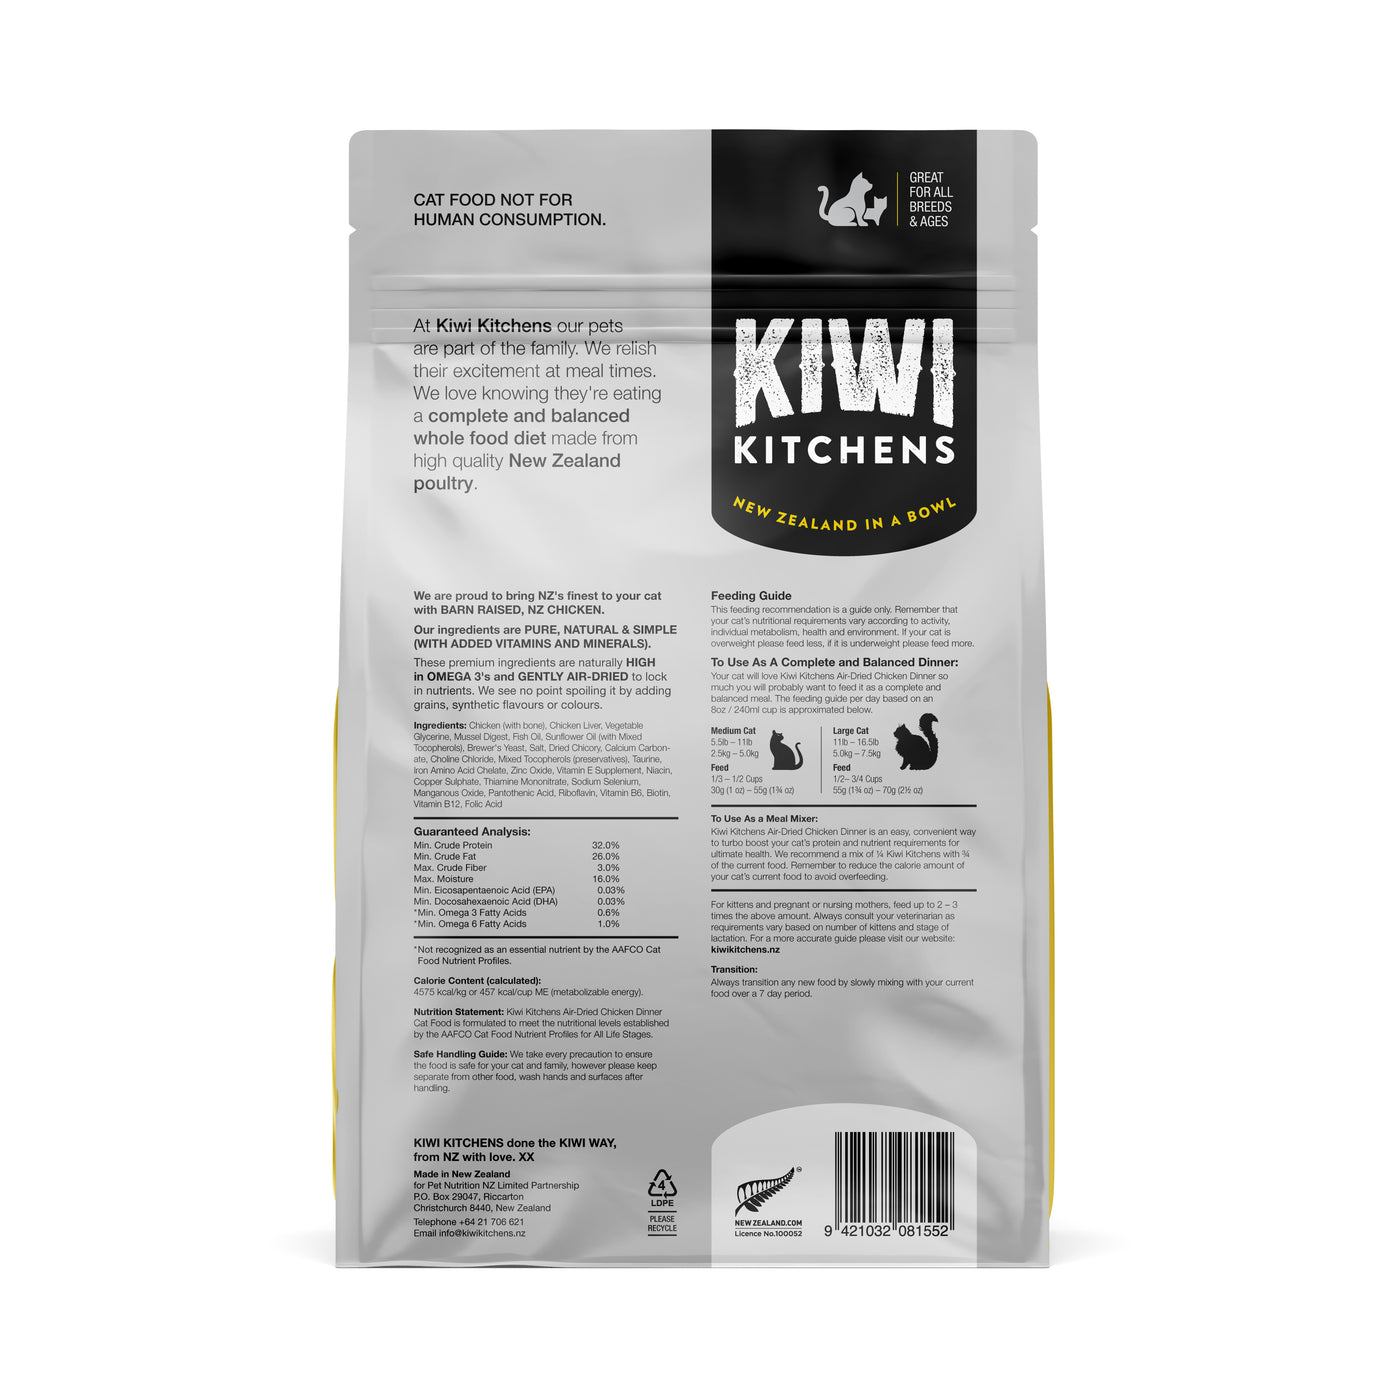 Kiwi Kitchens Gently Air-Dried Cat Food - Chicken